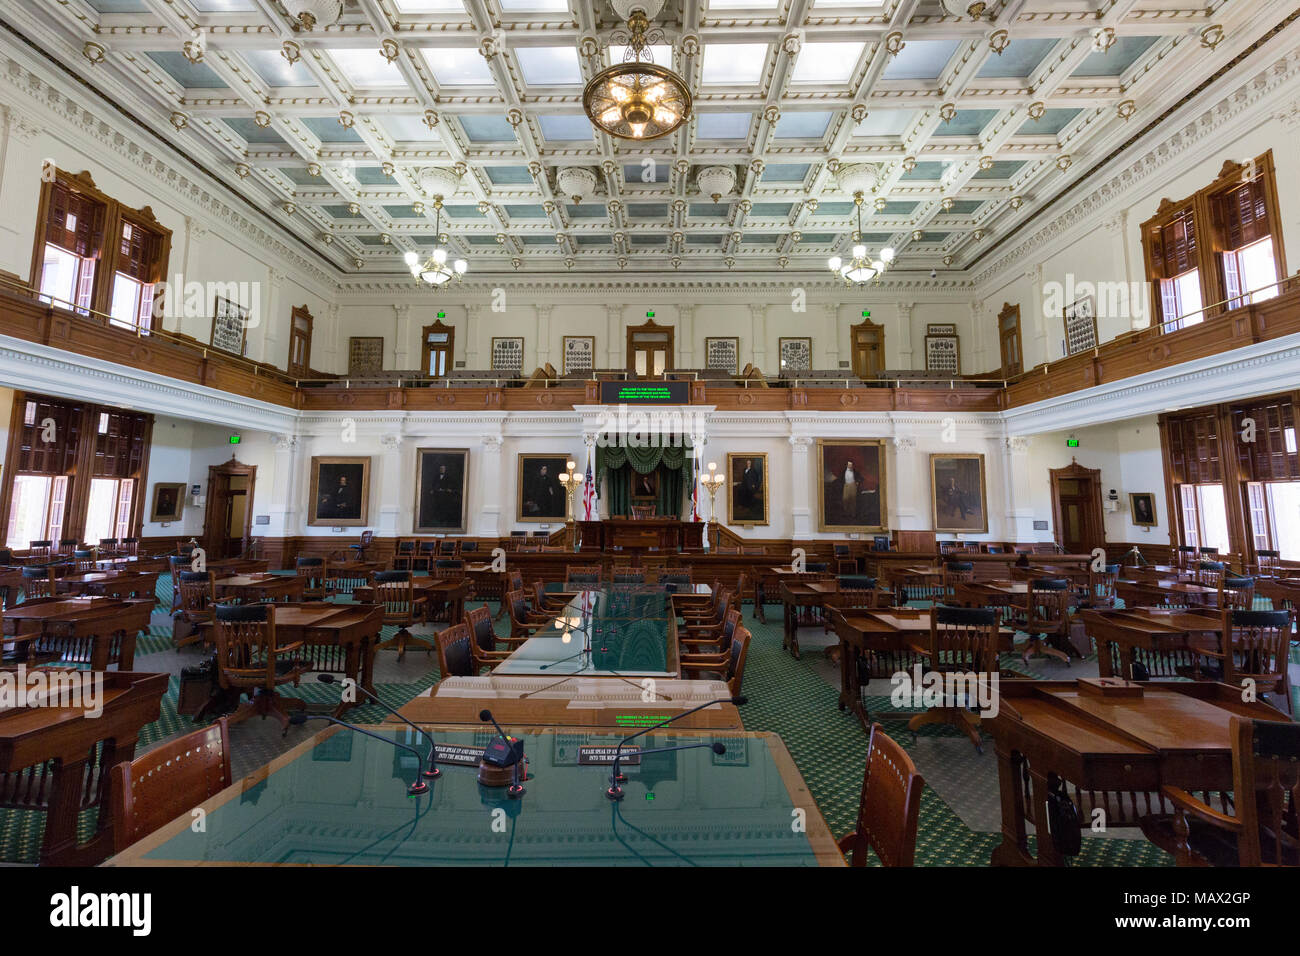 Texas Senate Chamber, in the interior of the Texas State Capitol building, Austin, Texas USA Stock Photo